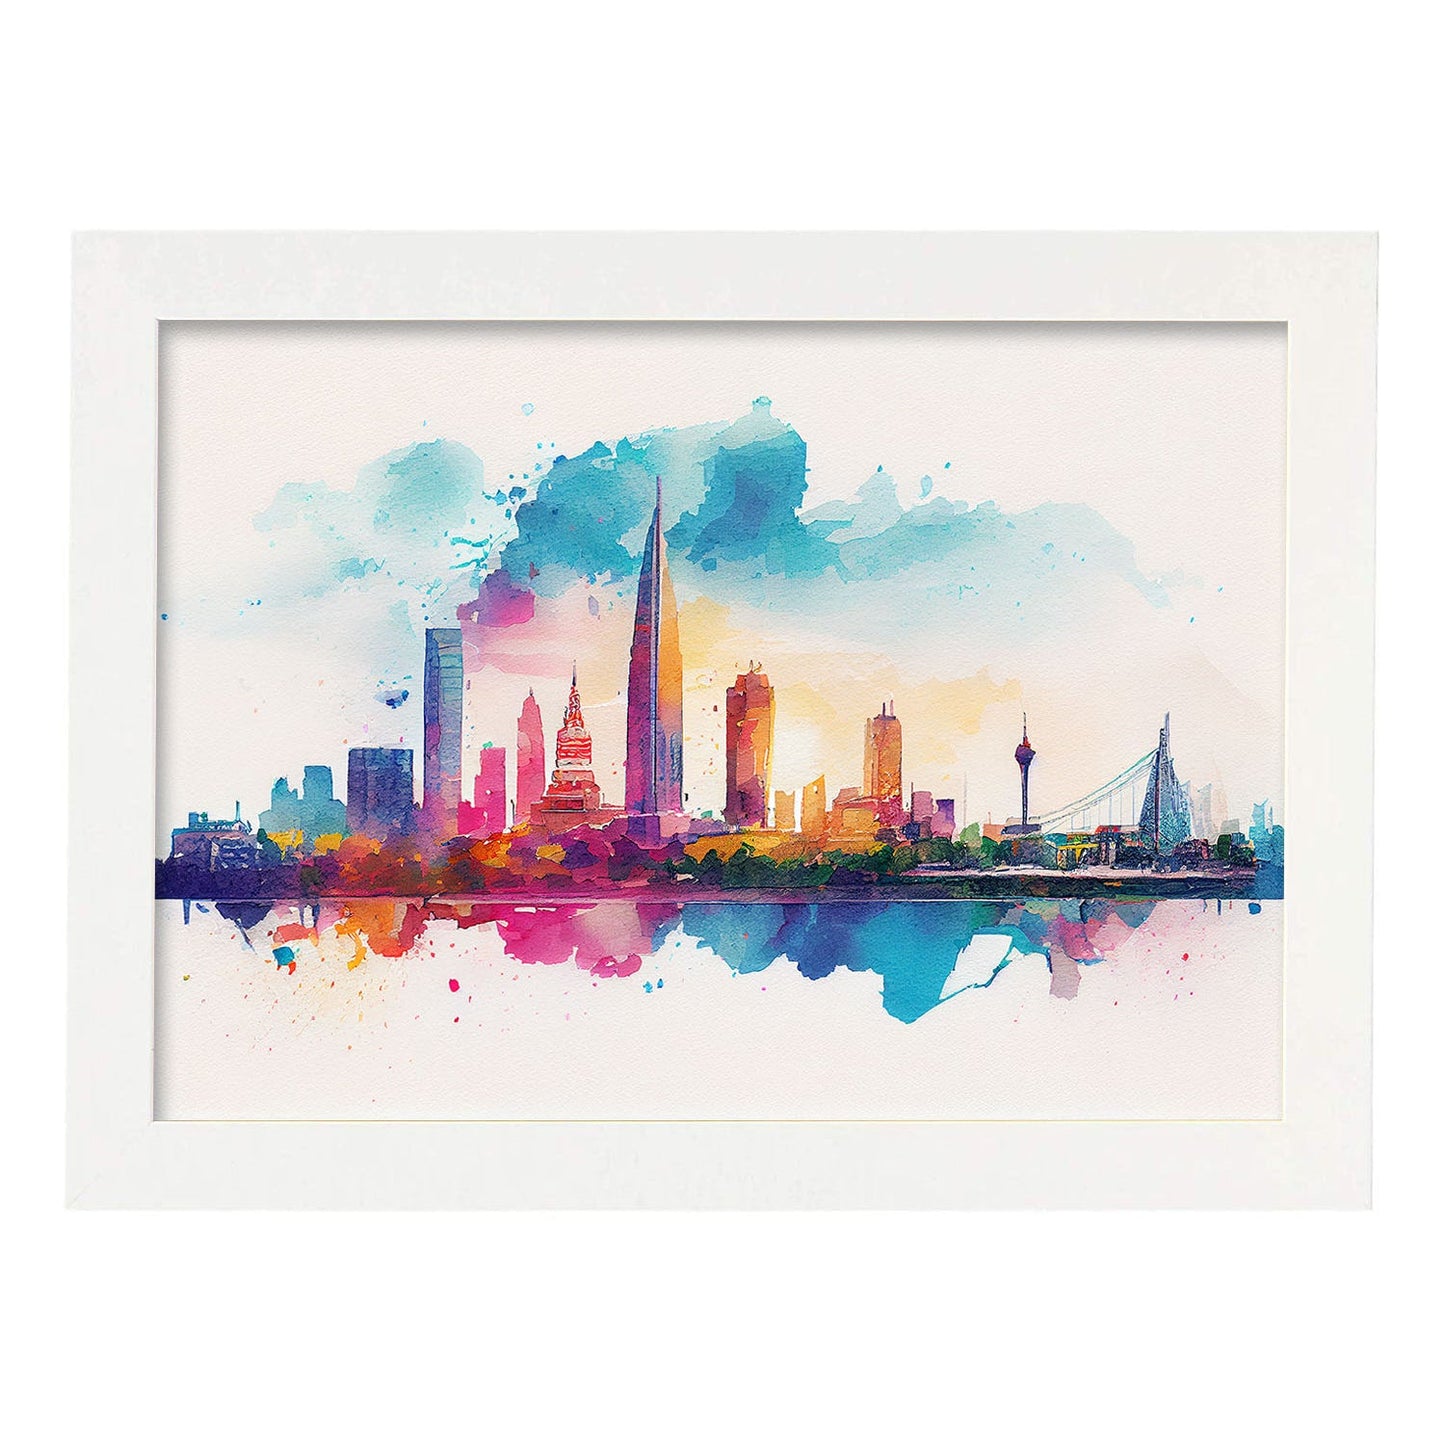 Nacnic watercolor of a skyline of the city of Ho Chi Minh City. Aesthetic Wall Art Prints for Bedroom or Living Room Design.-Artwork-Nacnic-A4-Marco Blanco-Nacnic Estudio SL